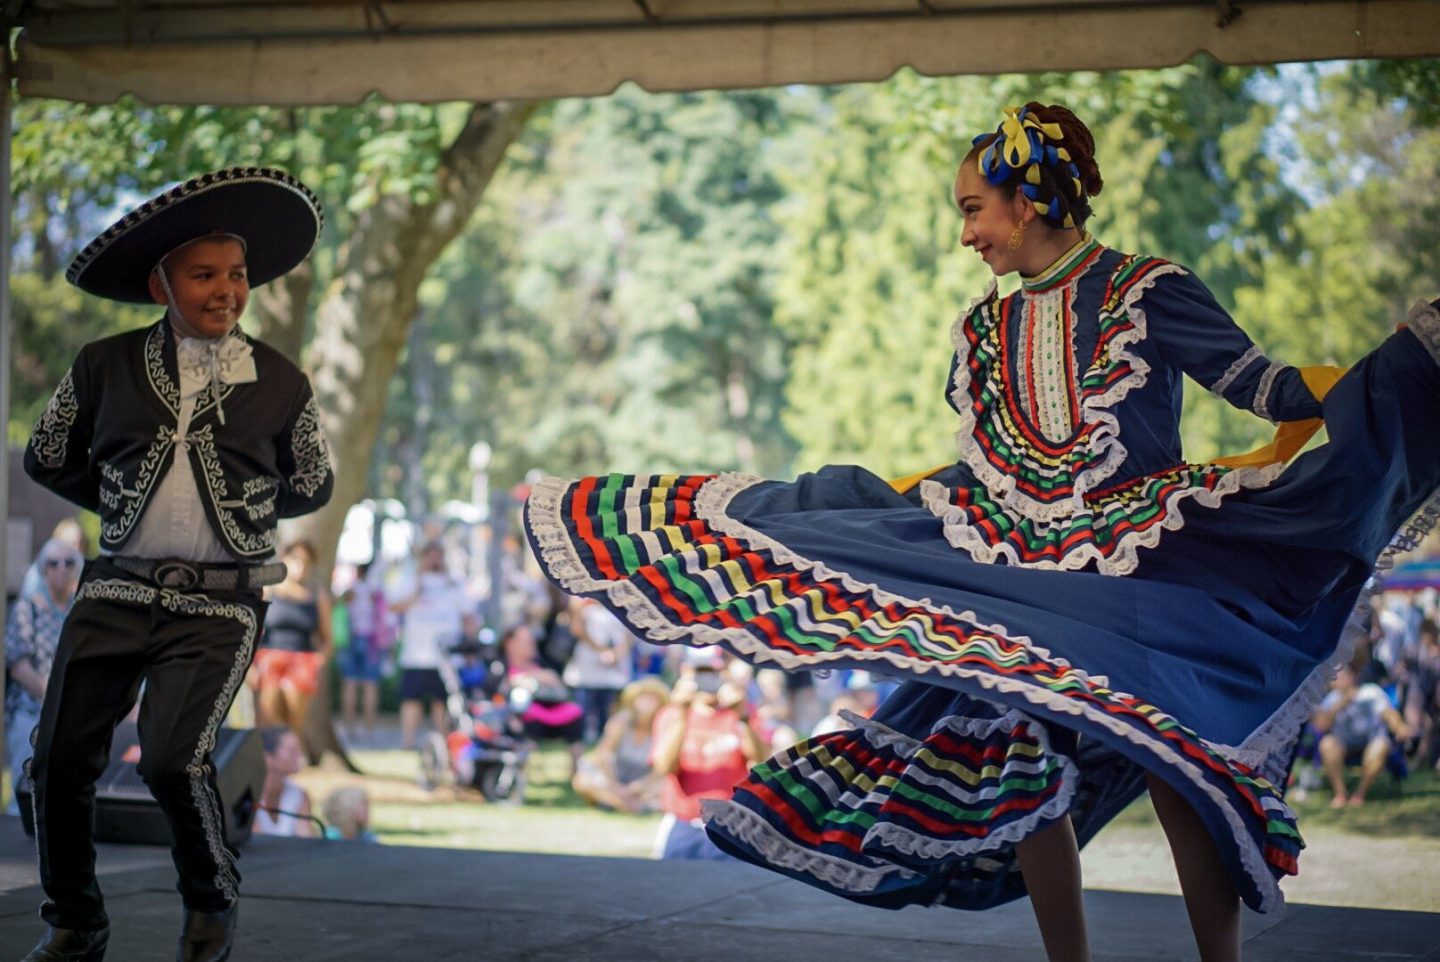 Two adolescents on a stage in traditional Mexican garb, are smiling and looking at each other mid-dance.